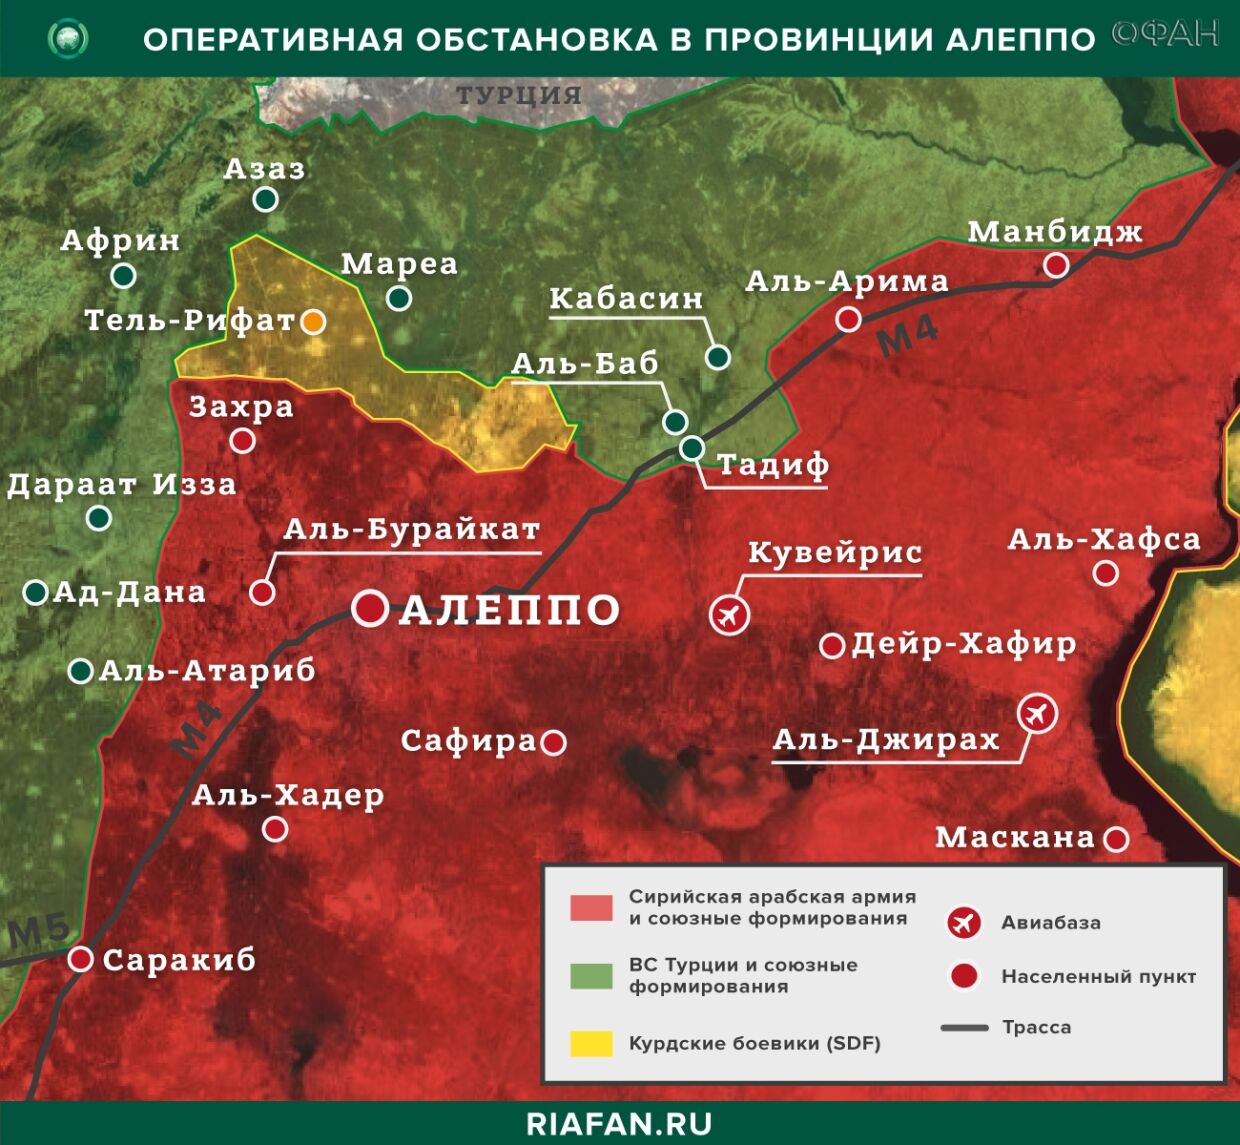 Syria the results of the day on 30 April 06.00: Kurds say they are not involved in terrorist attack in Afrin, The United States is throwing equipment to the east of the ATS